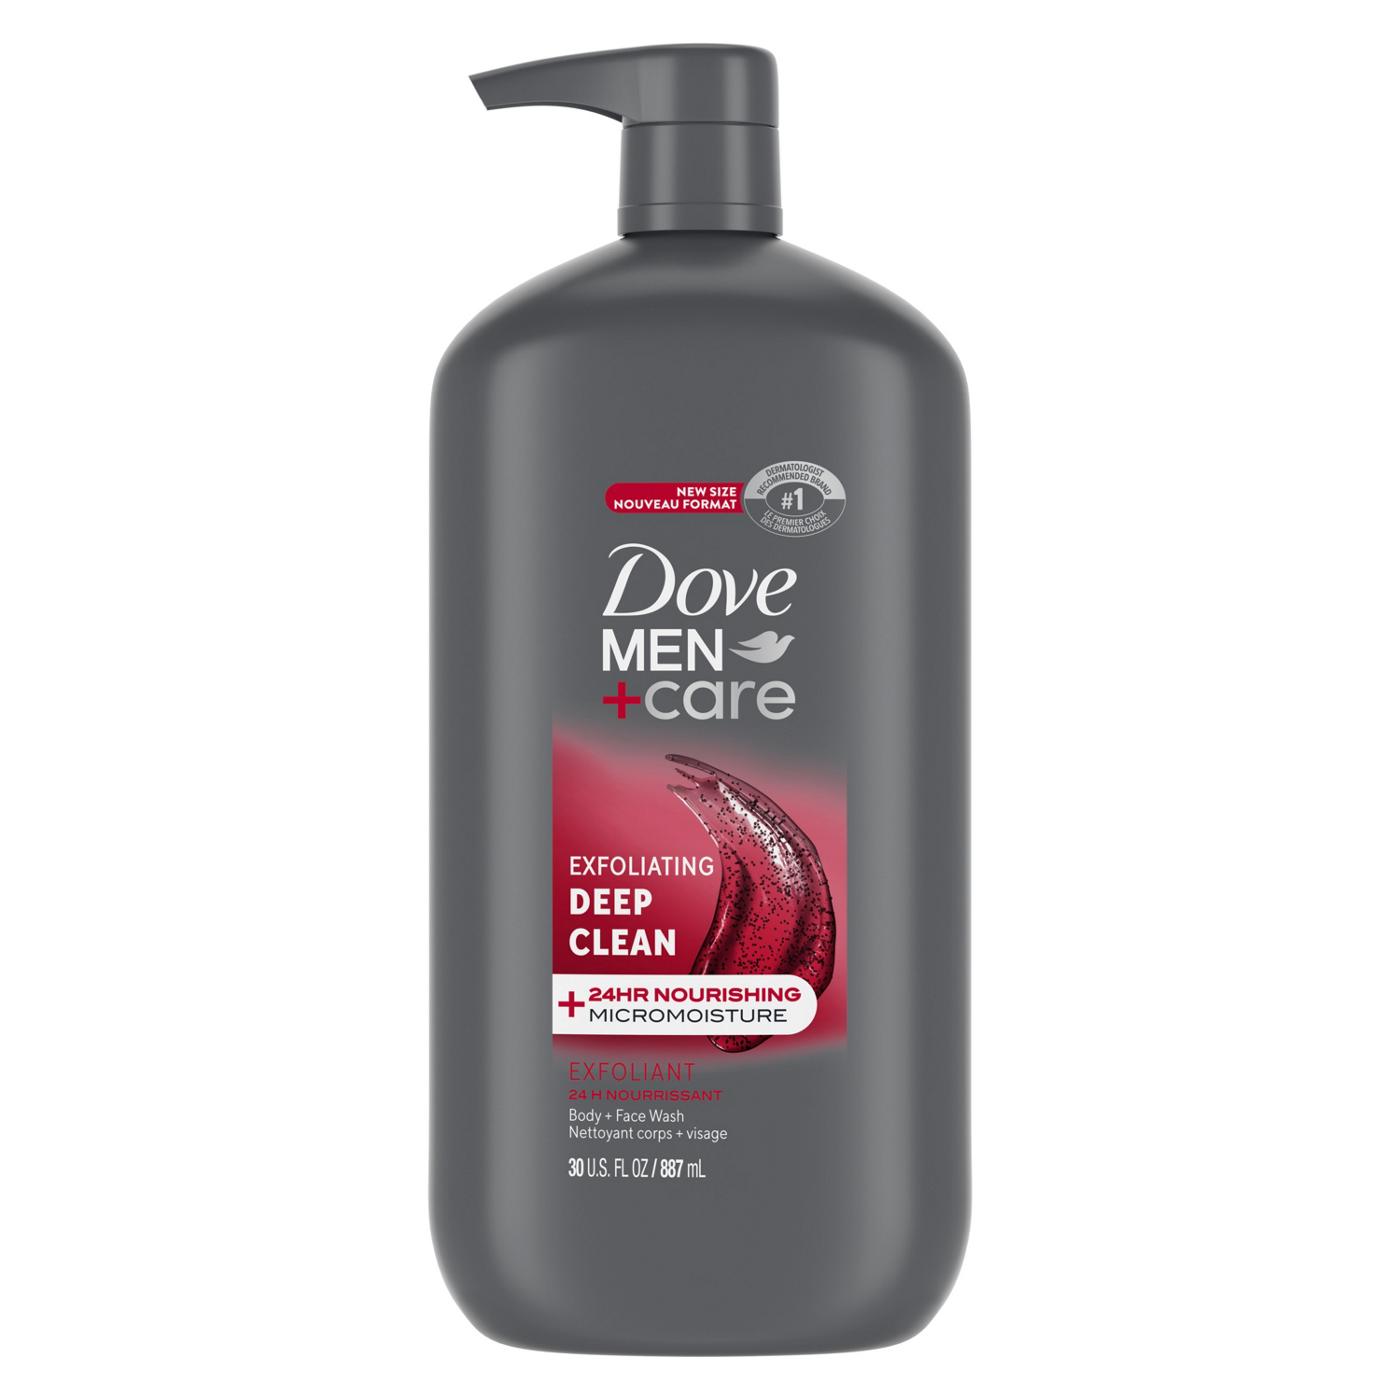 Dove Men+Care Exfoliating Deep Clean Body + Face Wash ; image 1 of 5